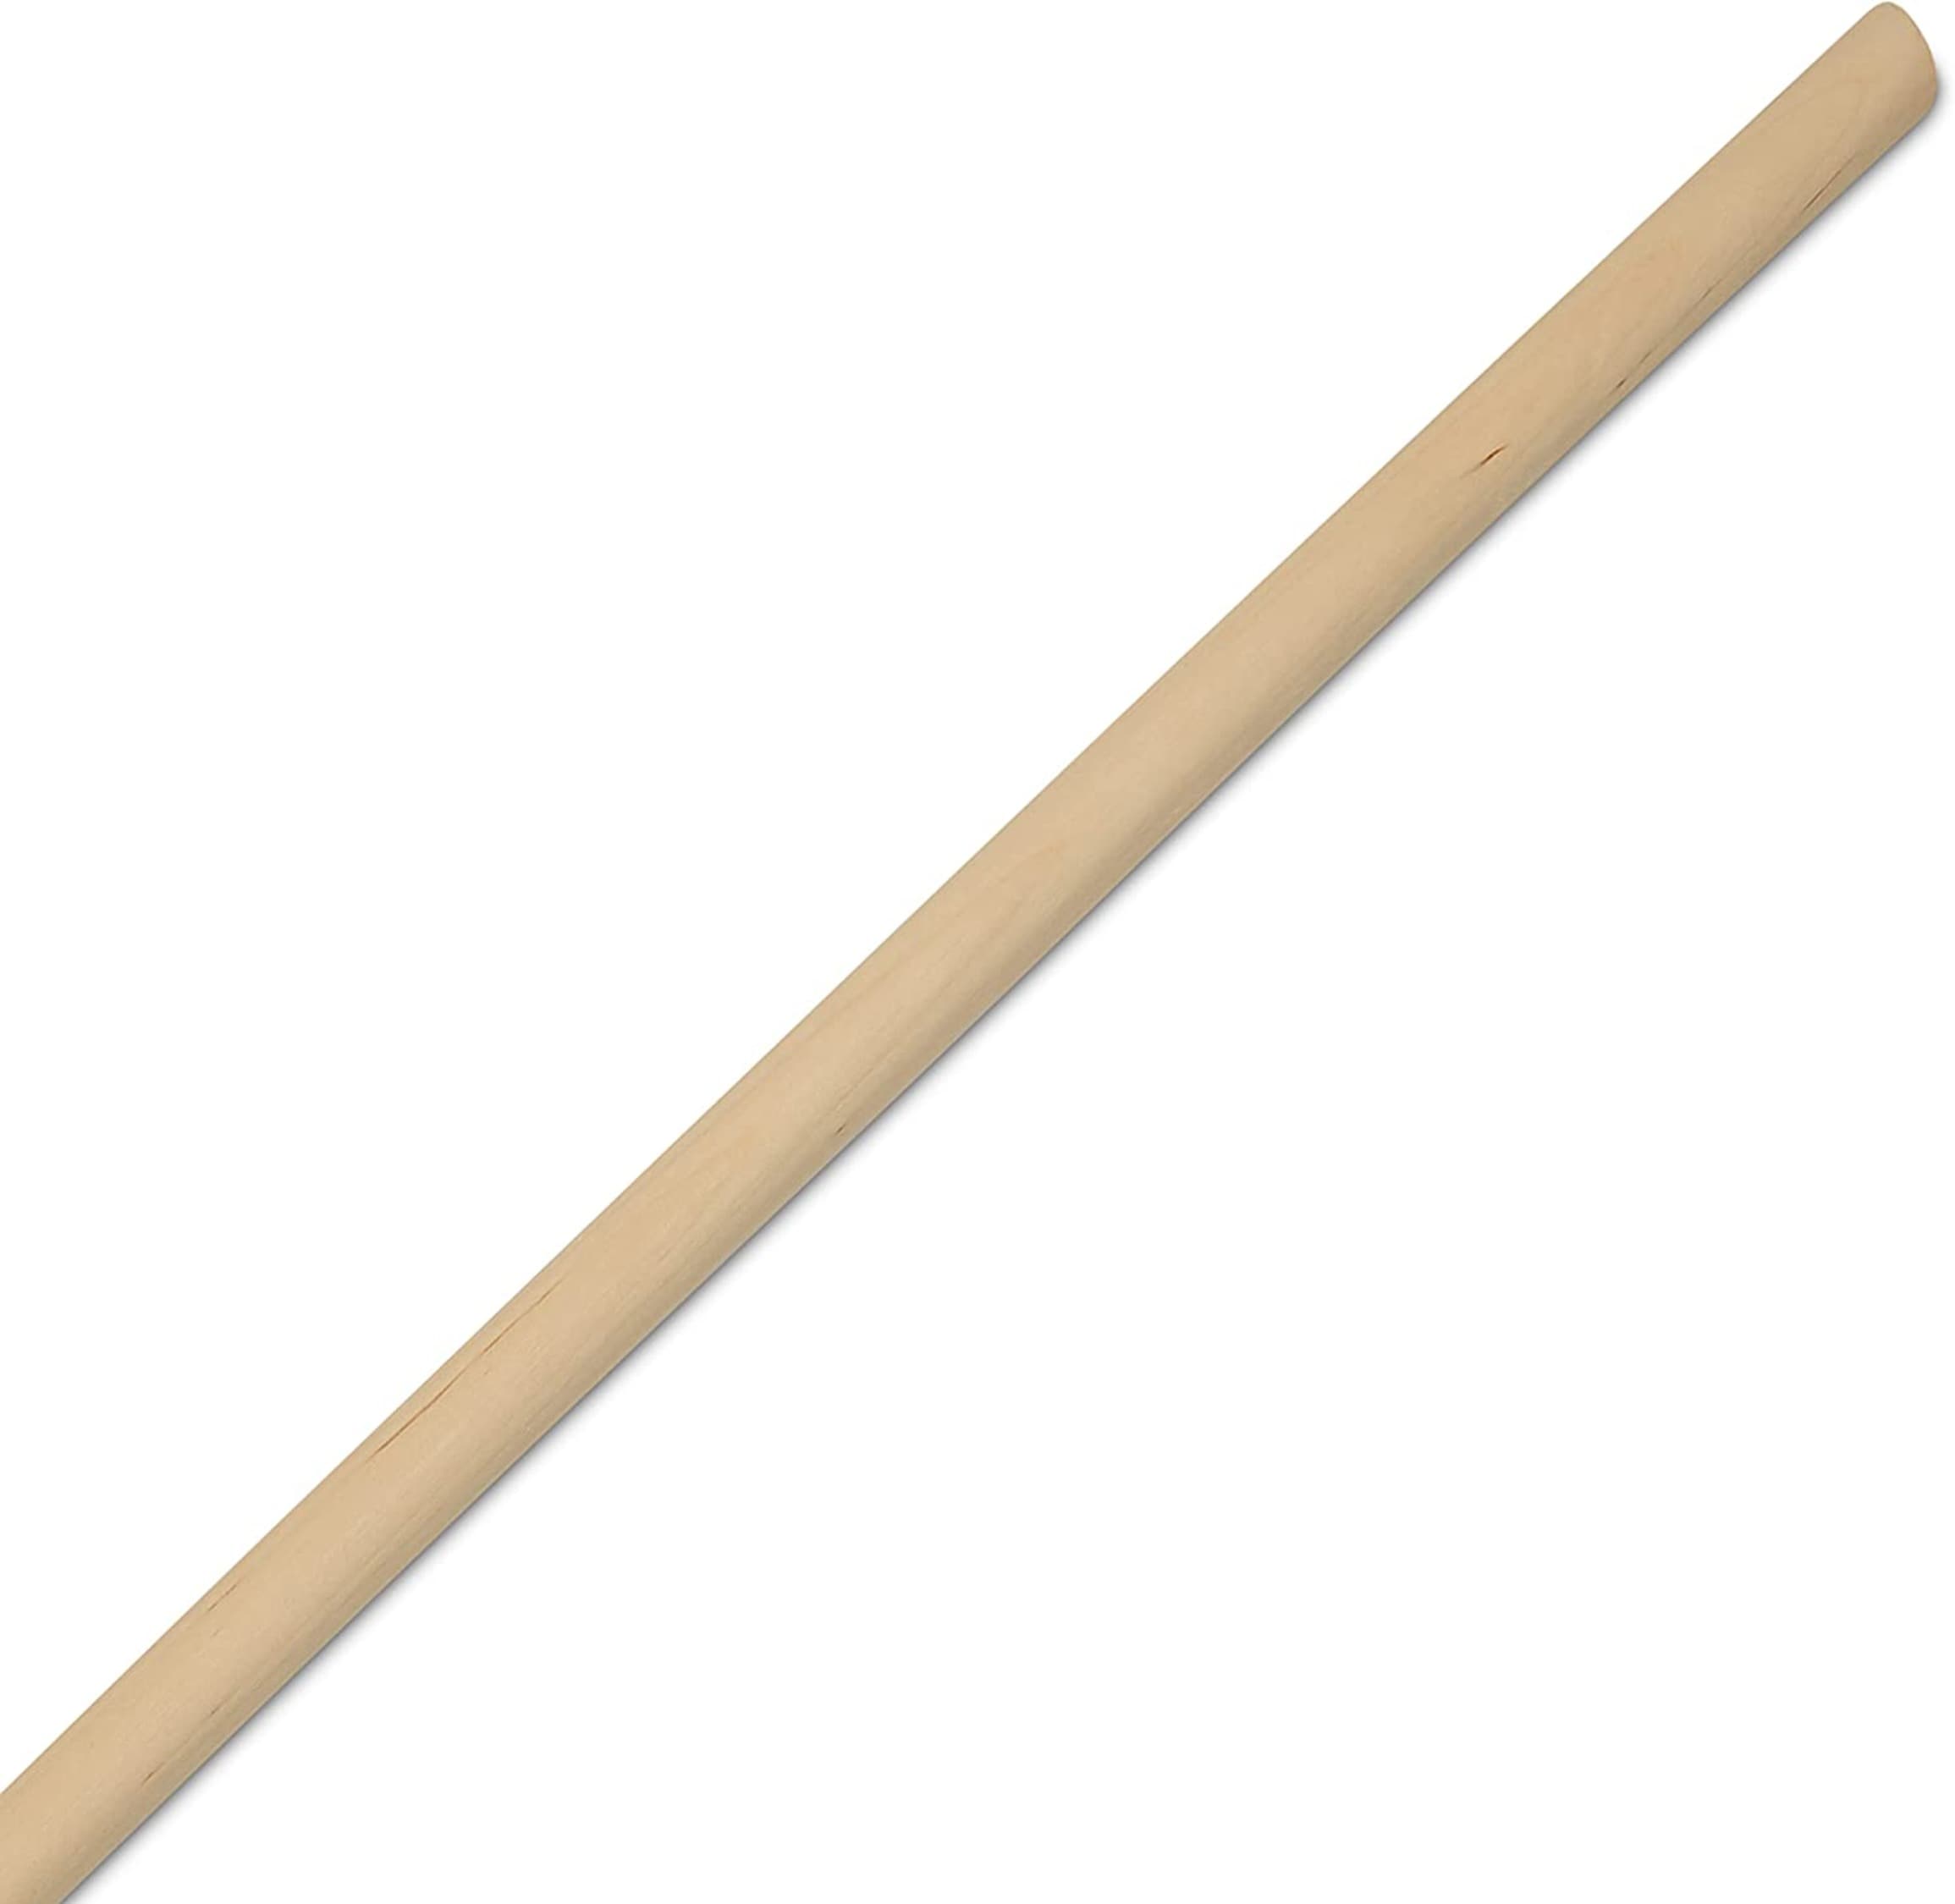 Woodpeckers Crafts Dowel Rods Wood Sticks- 5/8 X 72 In.- 25-Pieces